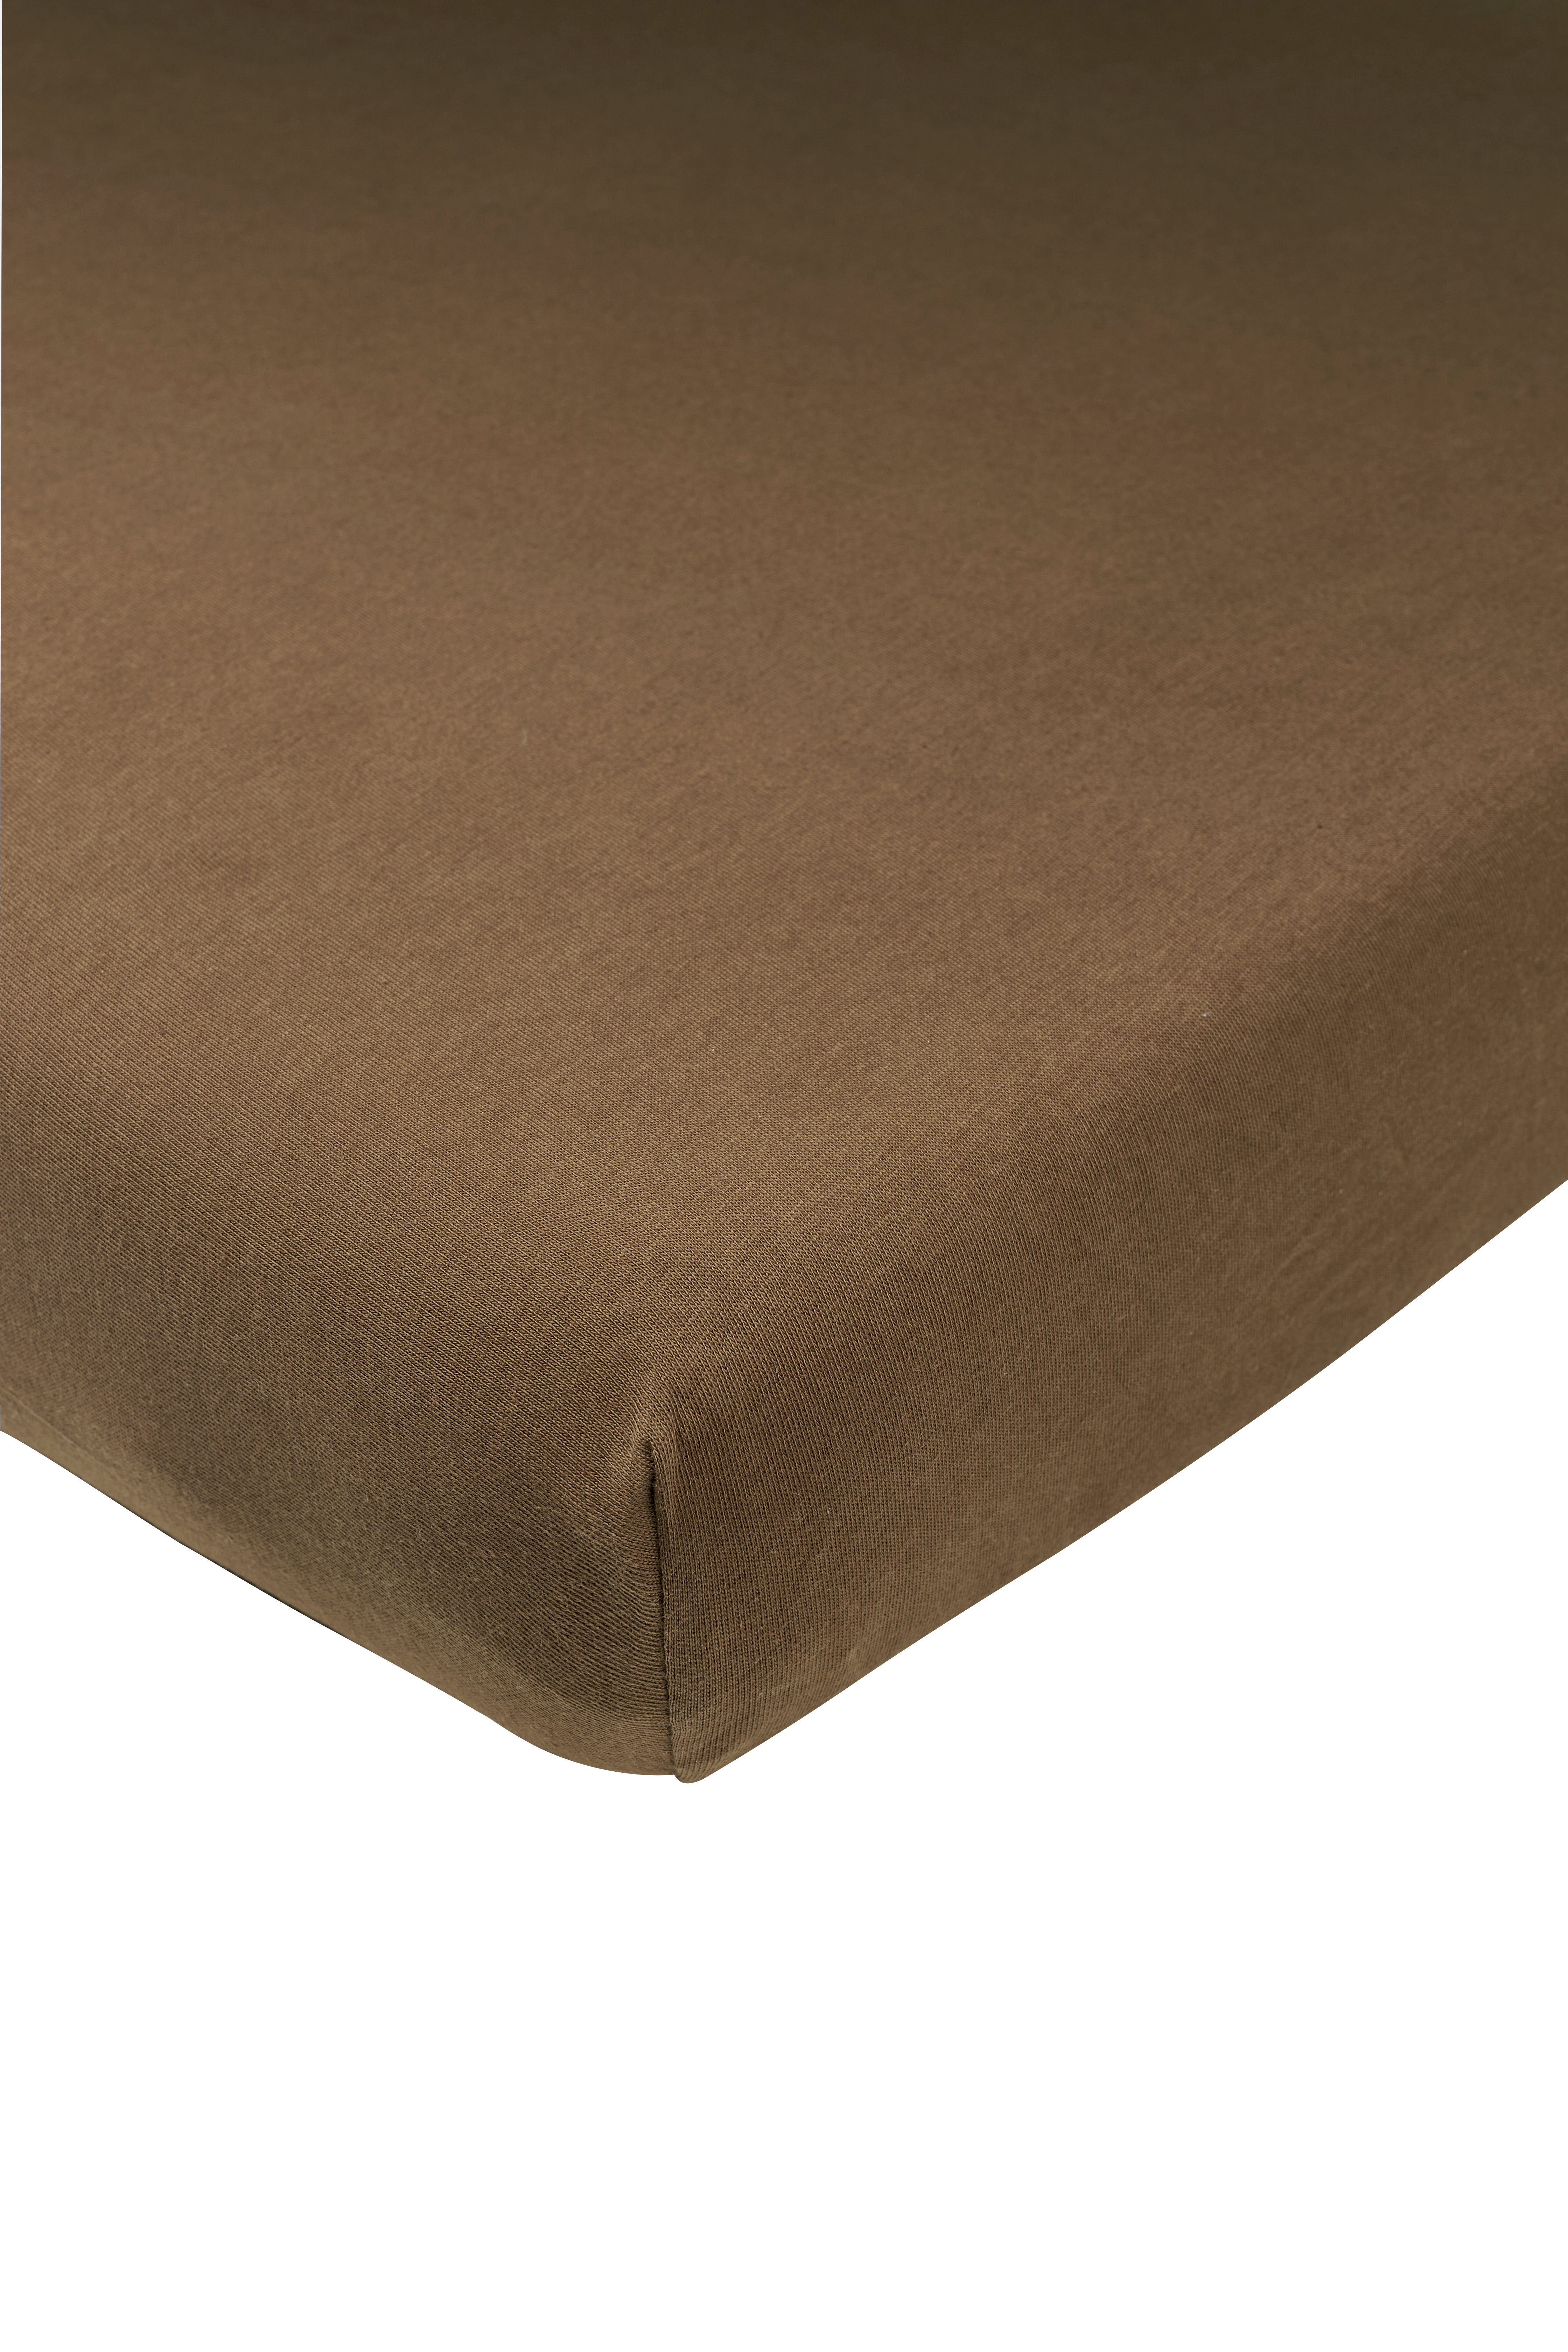 Fitted sheet juniorbed Uni - chocolate - 70x140/150cm